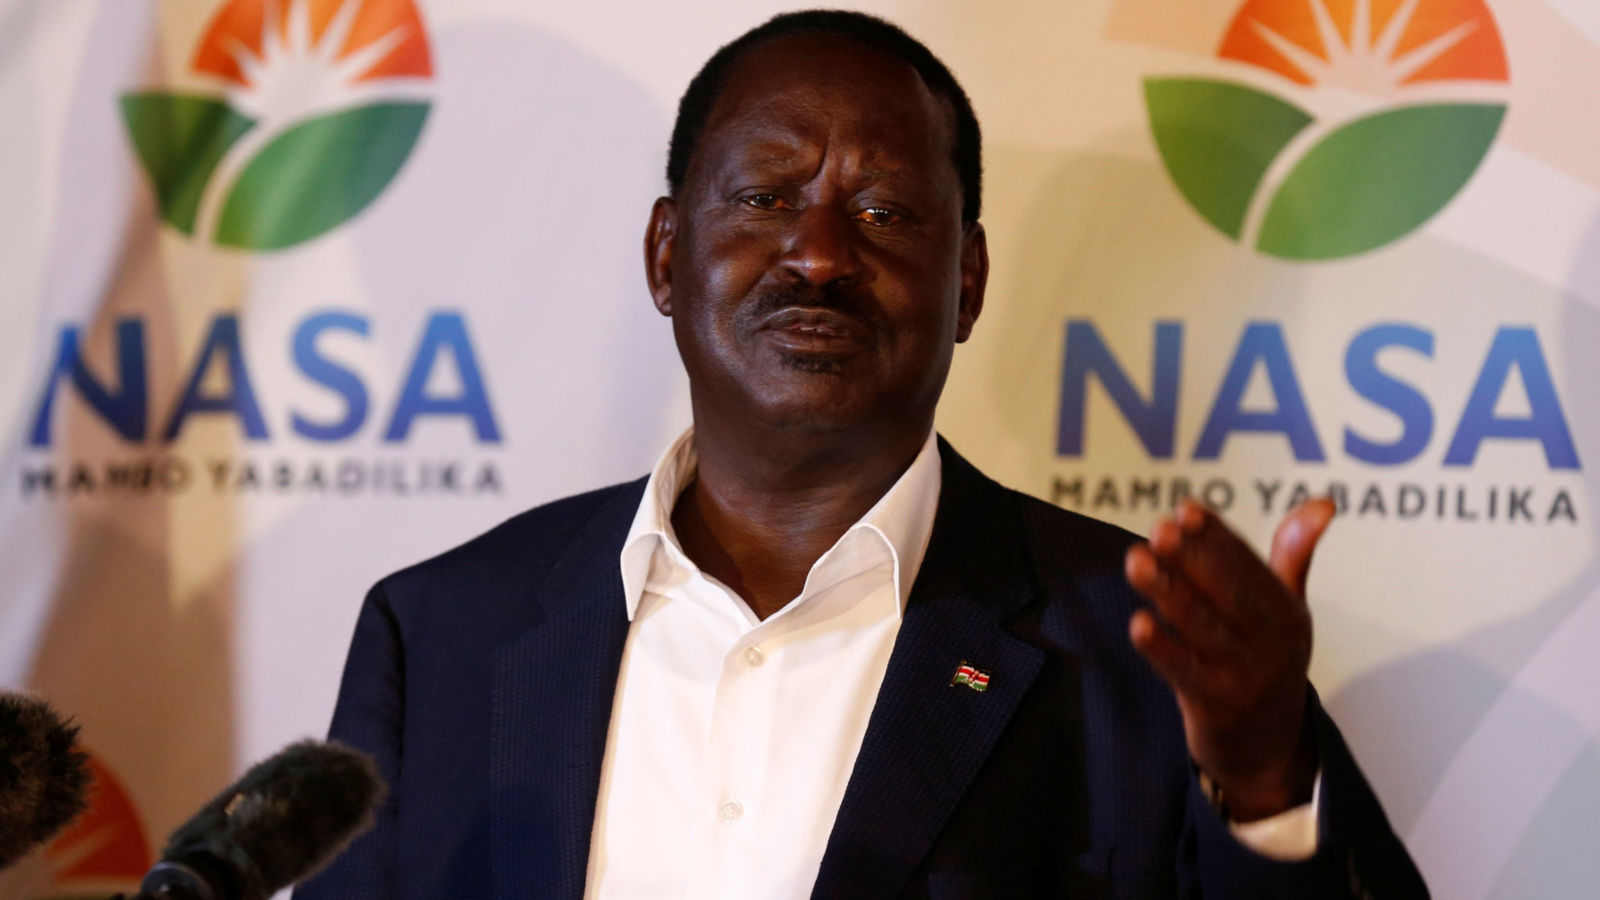 Kenyan opposition leader Raila Odinga, the presidential candidate of the National Super Alliance (NASA) coalition, address a news conference on the concluded presidential election in Nairobi, Kenya, August 9, 2017. REUTERS/Thomas Mukoya - RTS1AYOT